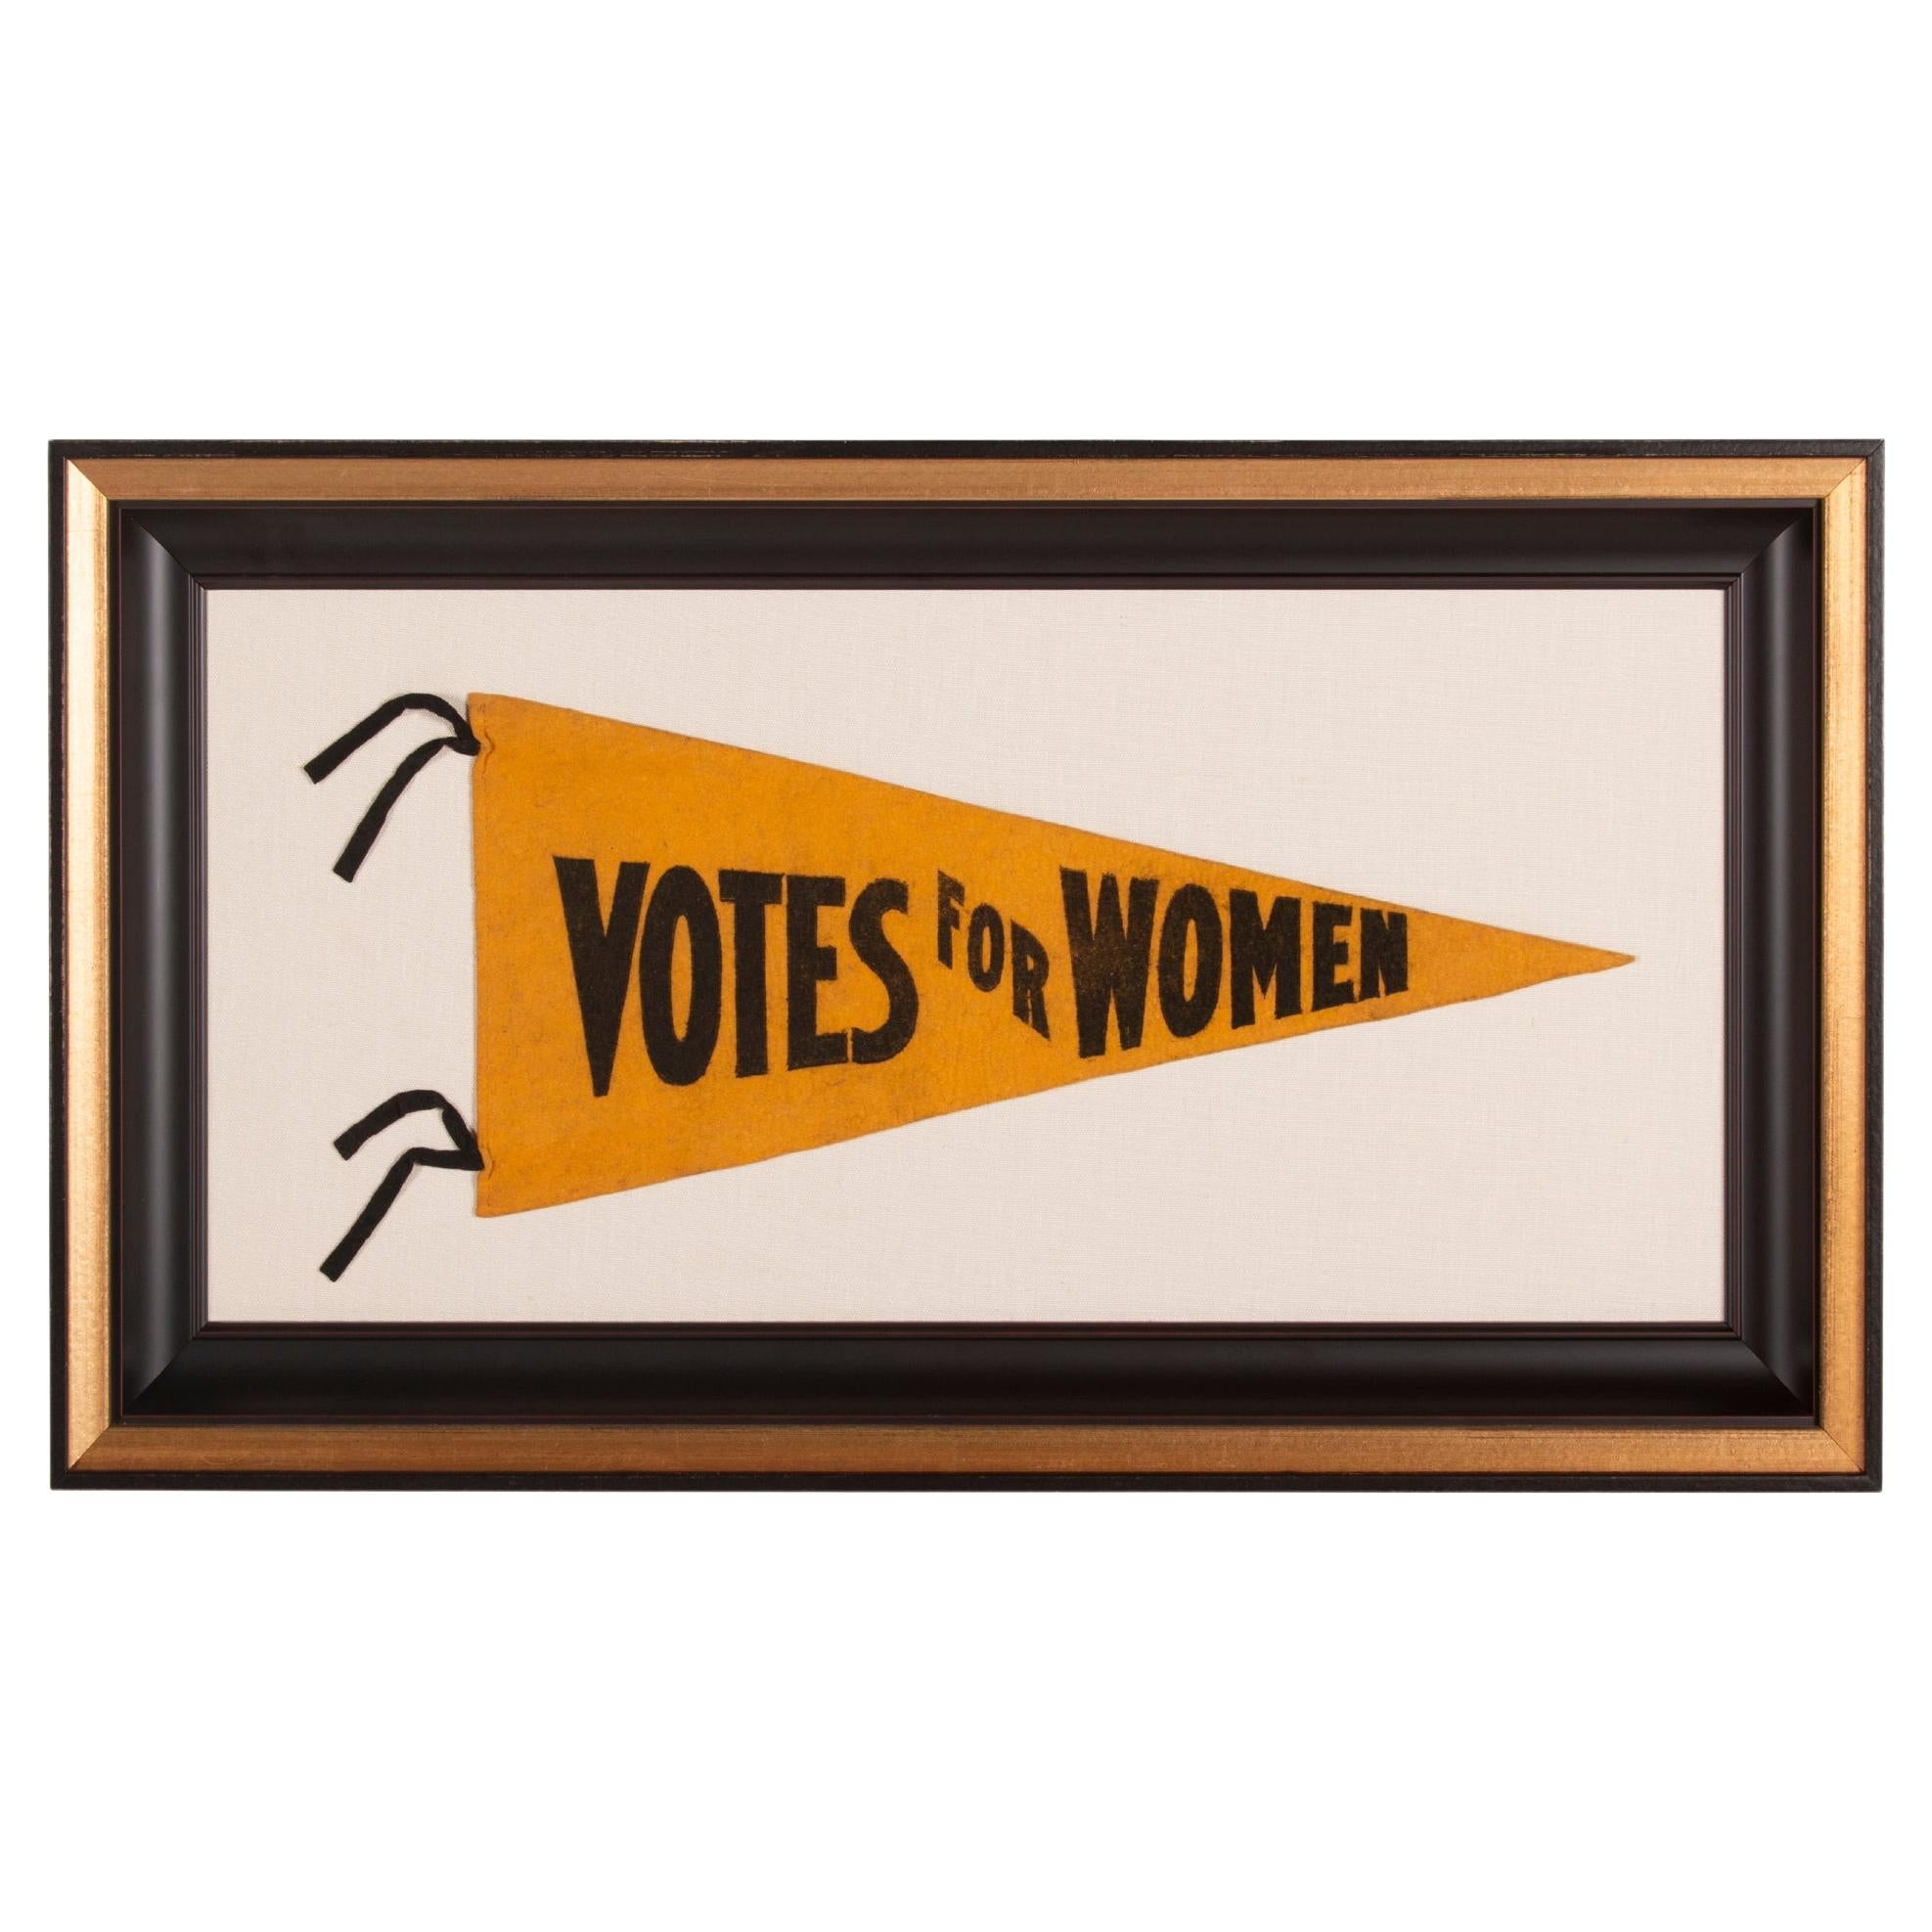 "Votes for Women: Suffrage Pennant ca 1912-1920